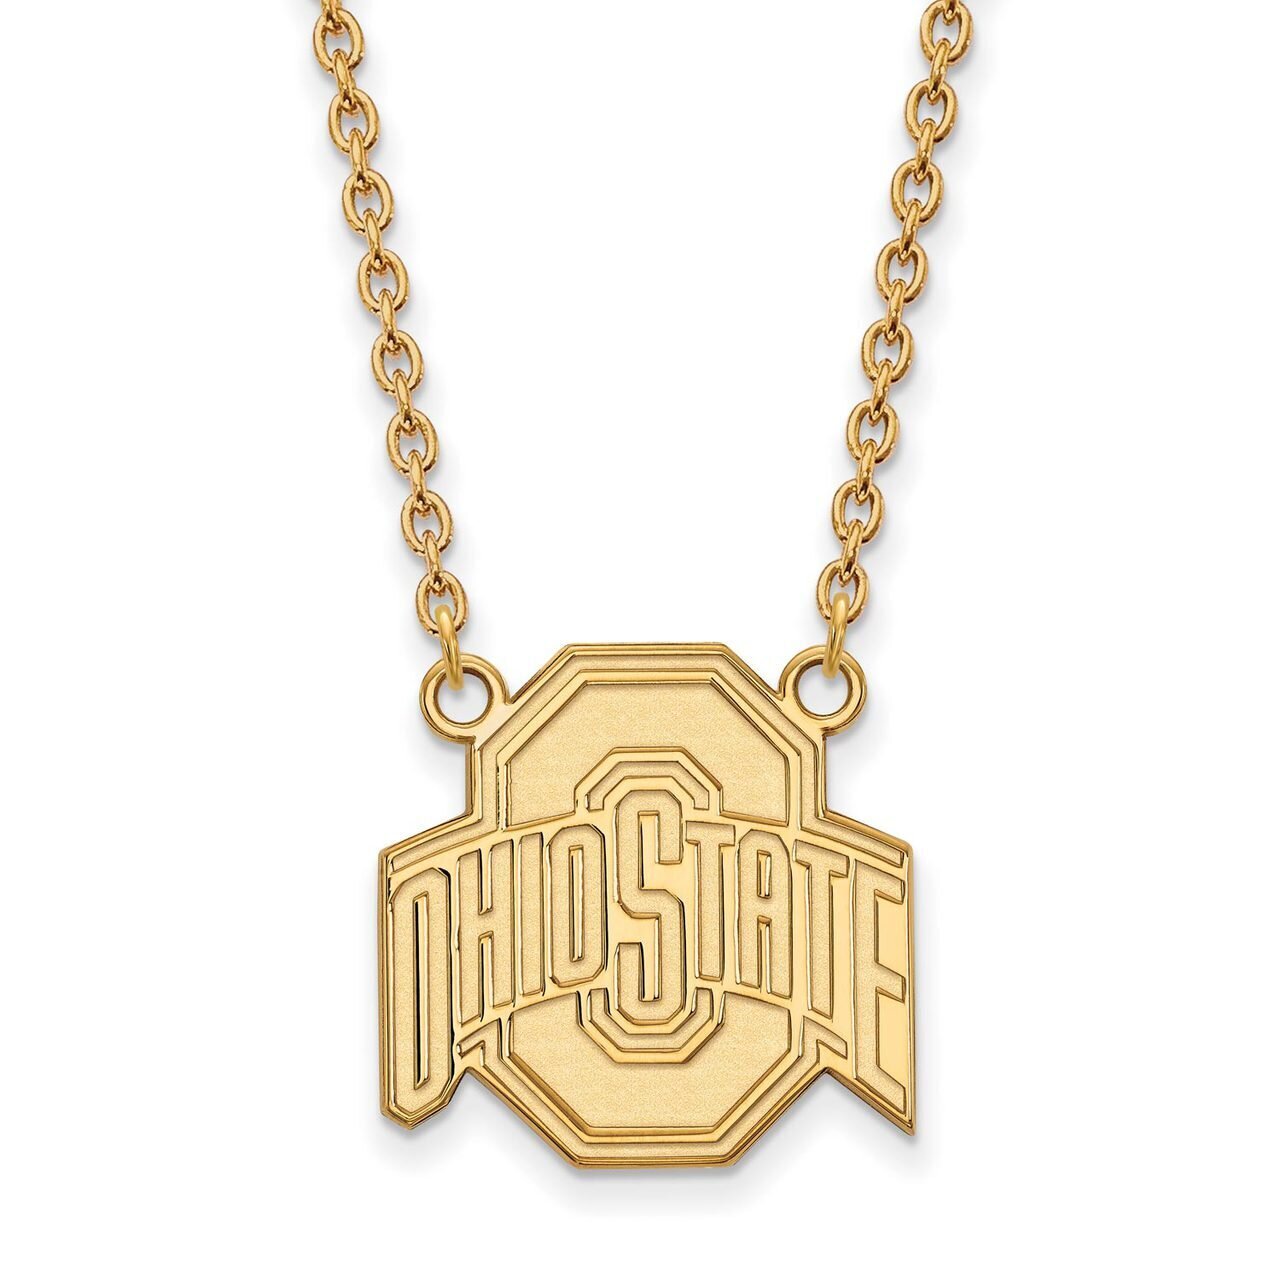 Ohio State University Large Pendant with Chain Necklace 14k Yellow Gold 4Y016OSU-18